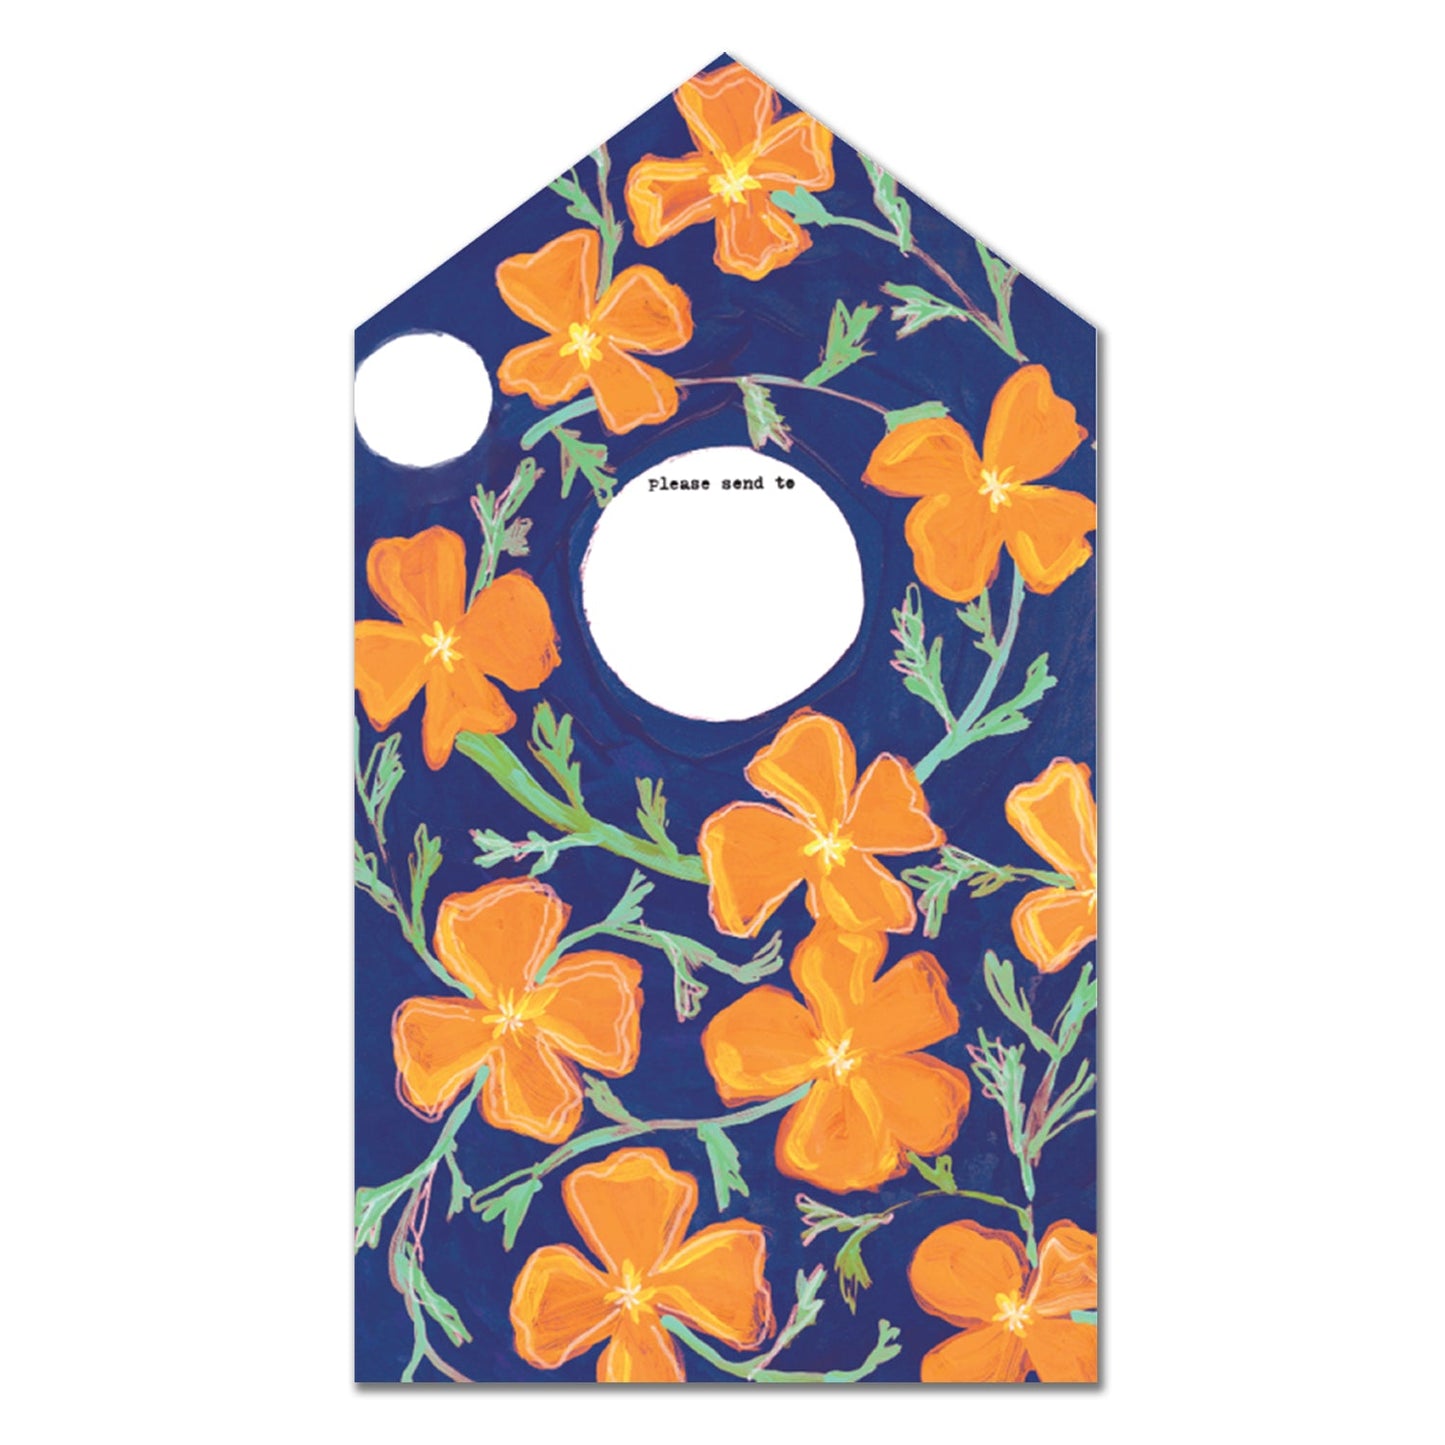 California Poppies(Set of 5) - Tiny and Snail